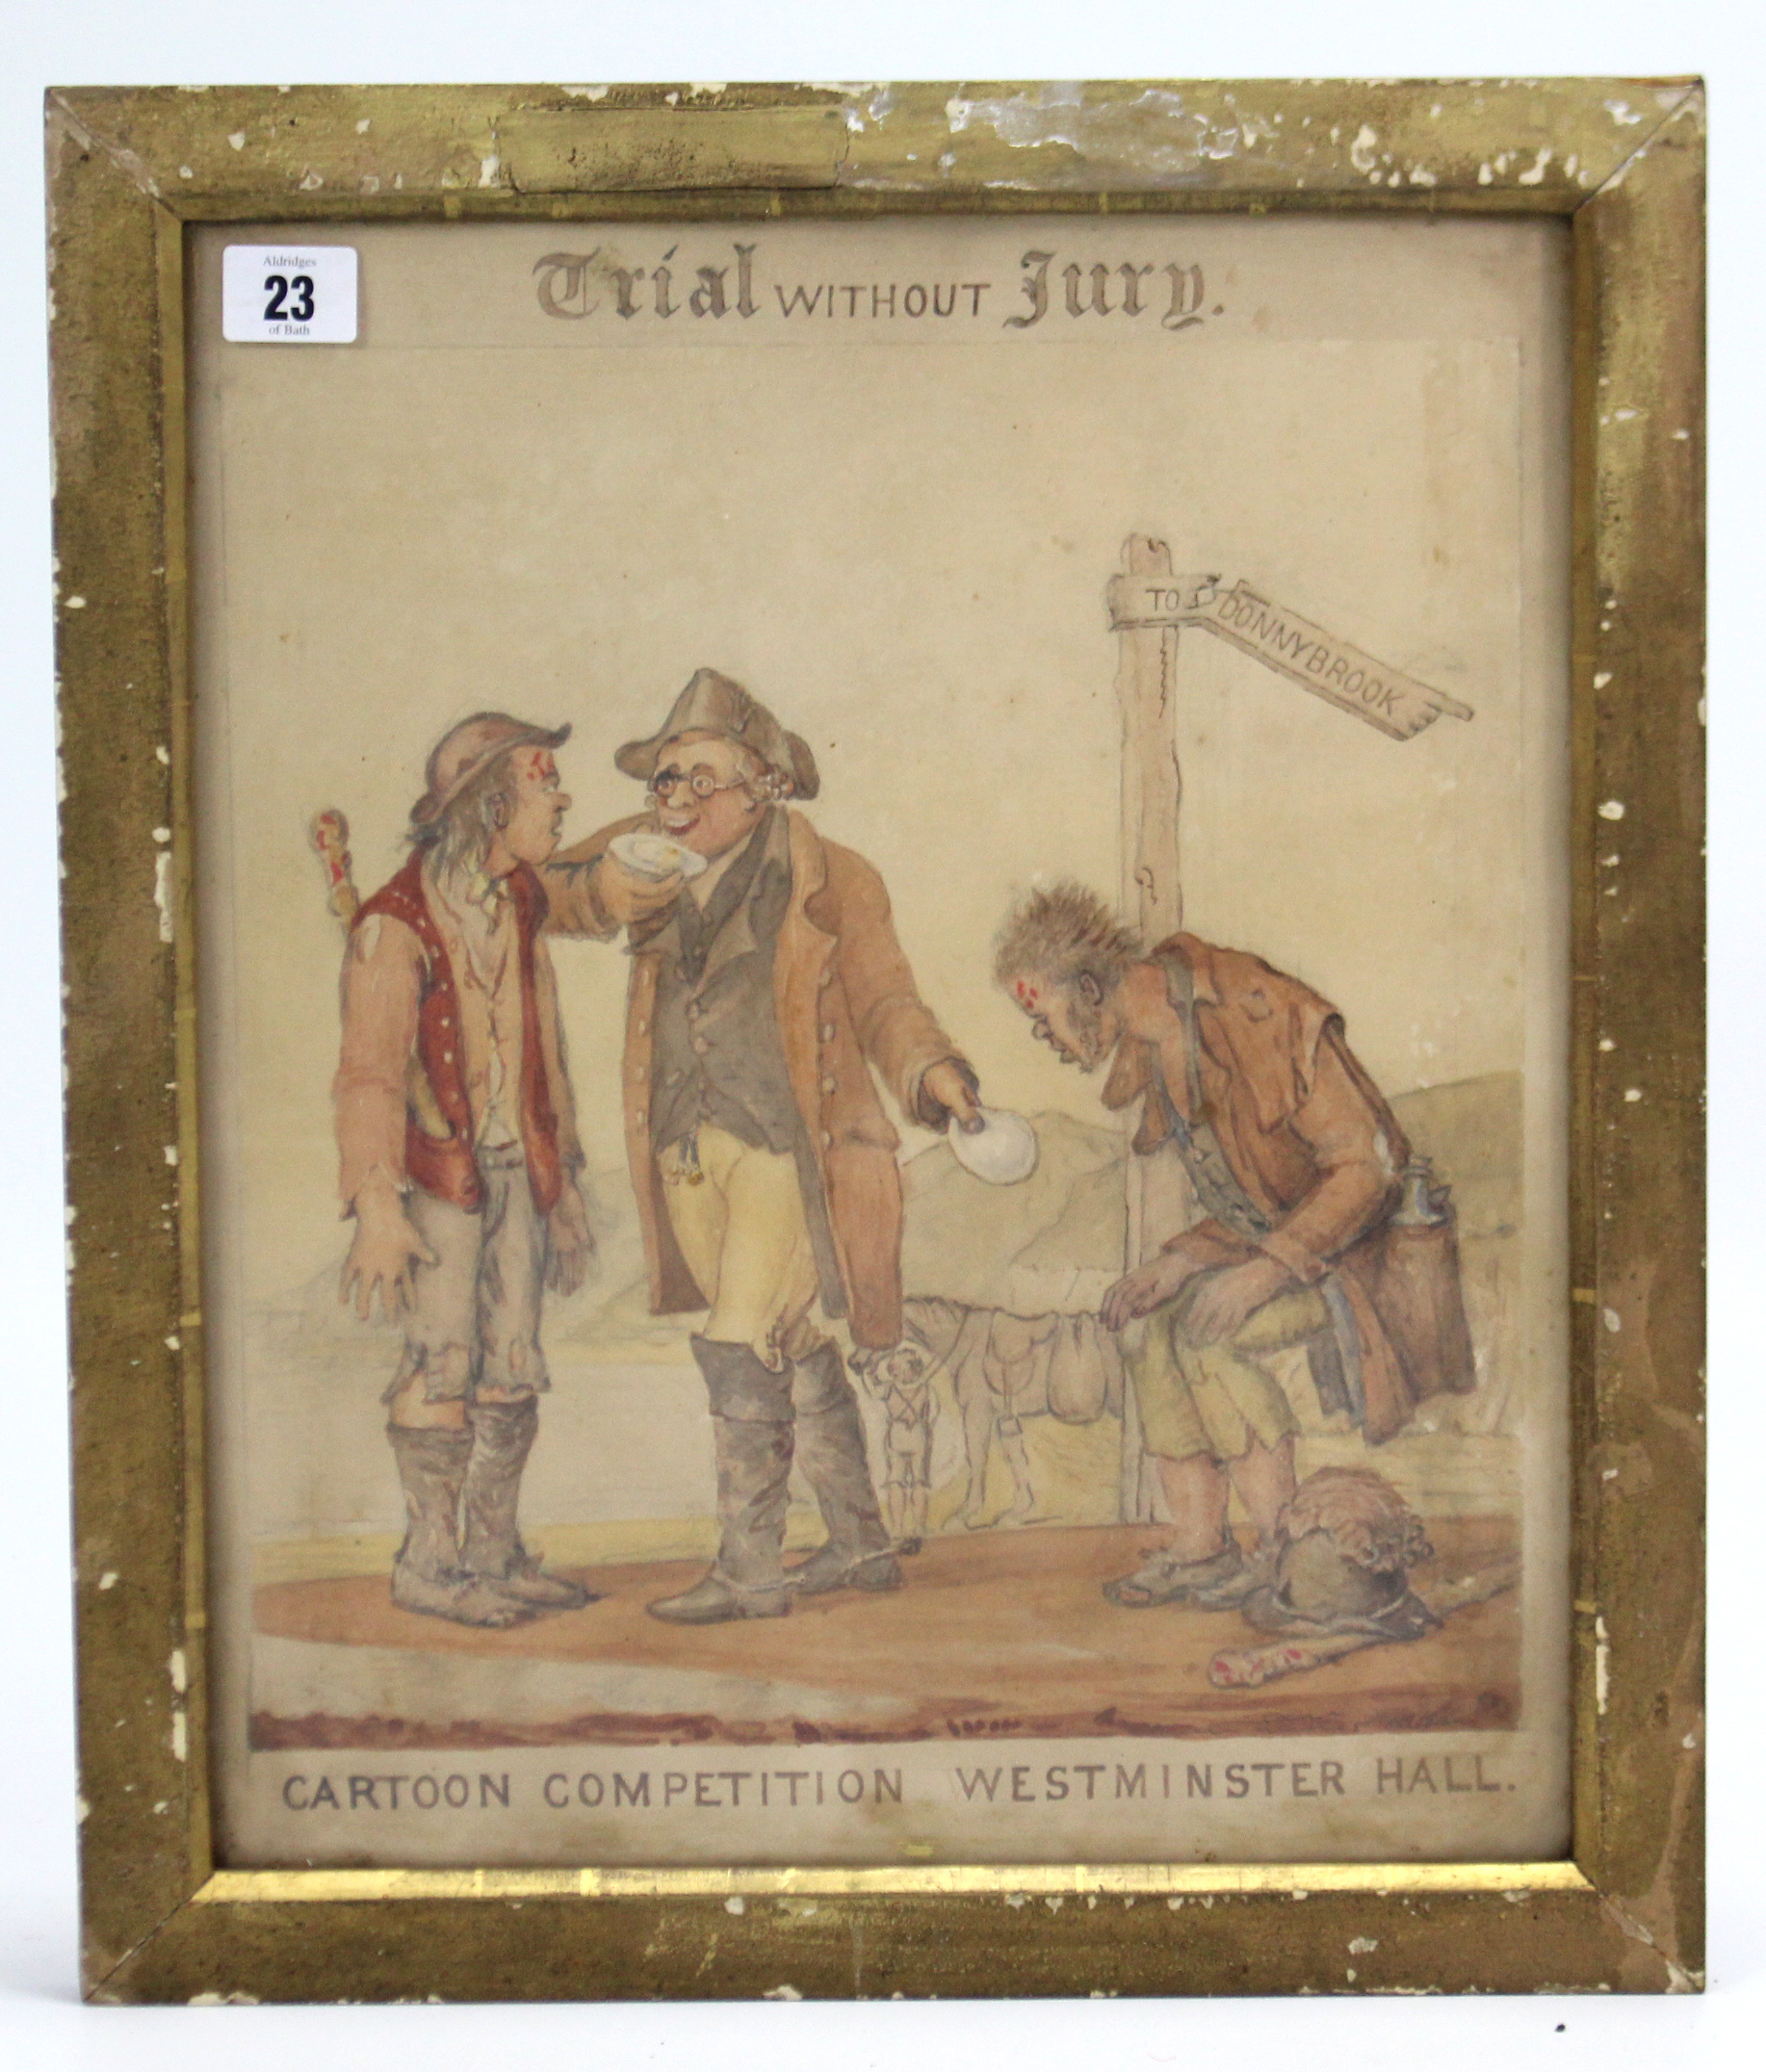 A late 19th century political cartoon titled “TRIAL WITHOUT JURY” (CARTOON COMPETITION WESTMINSTER